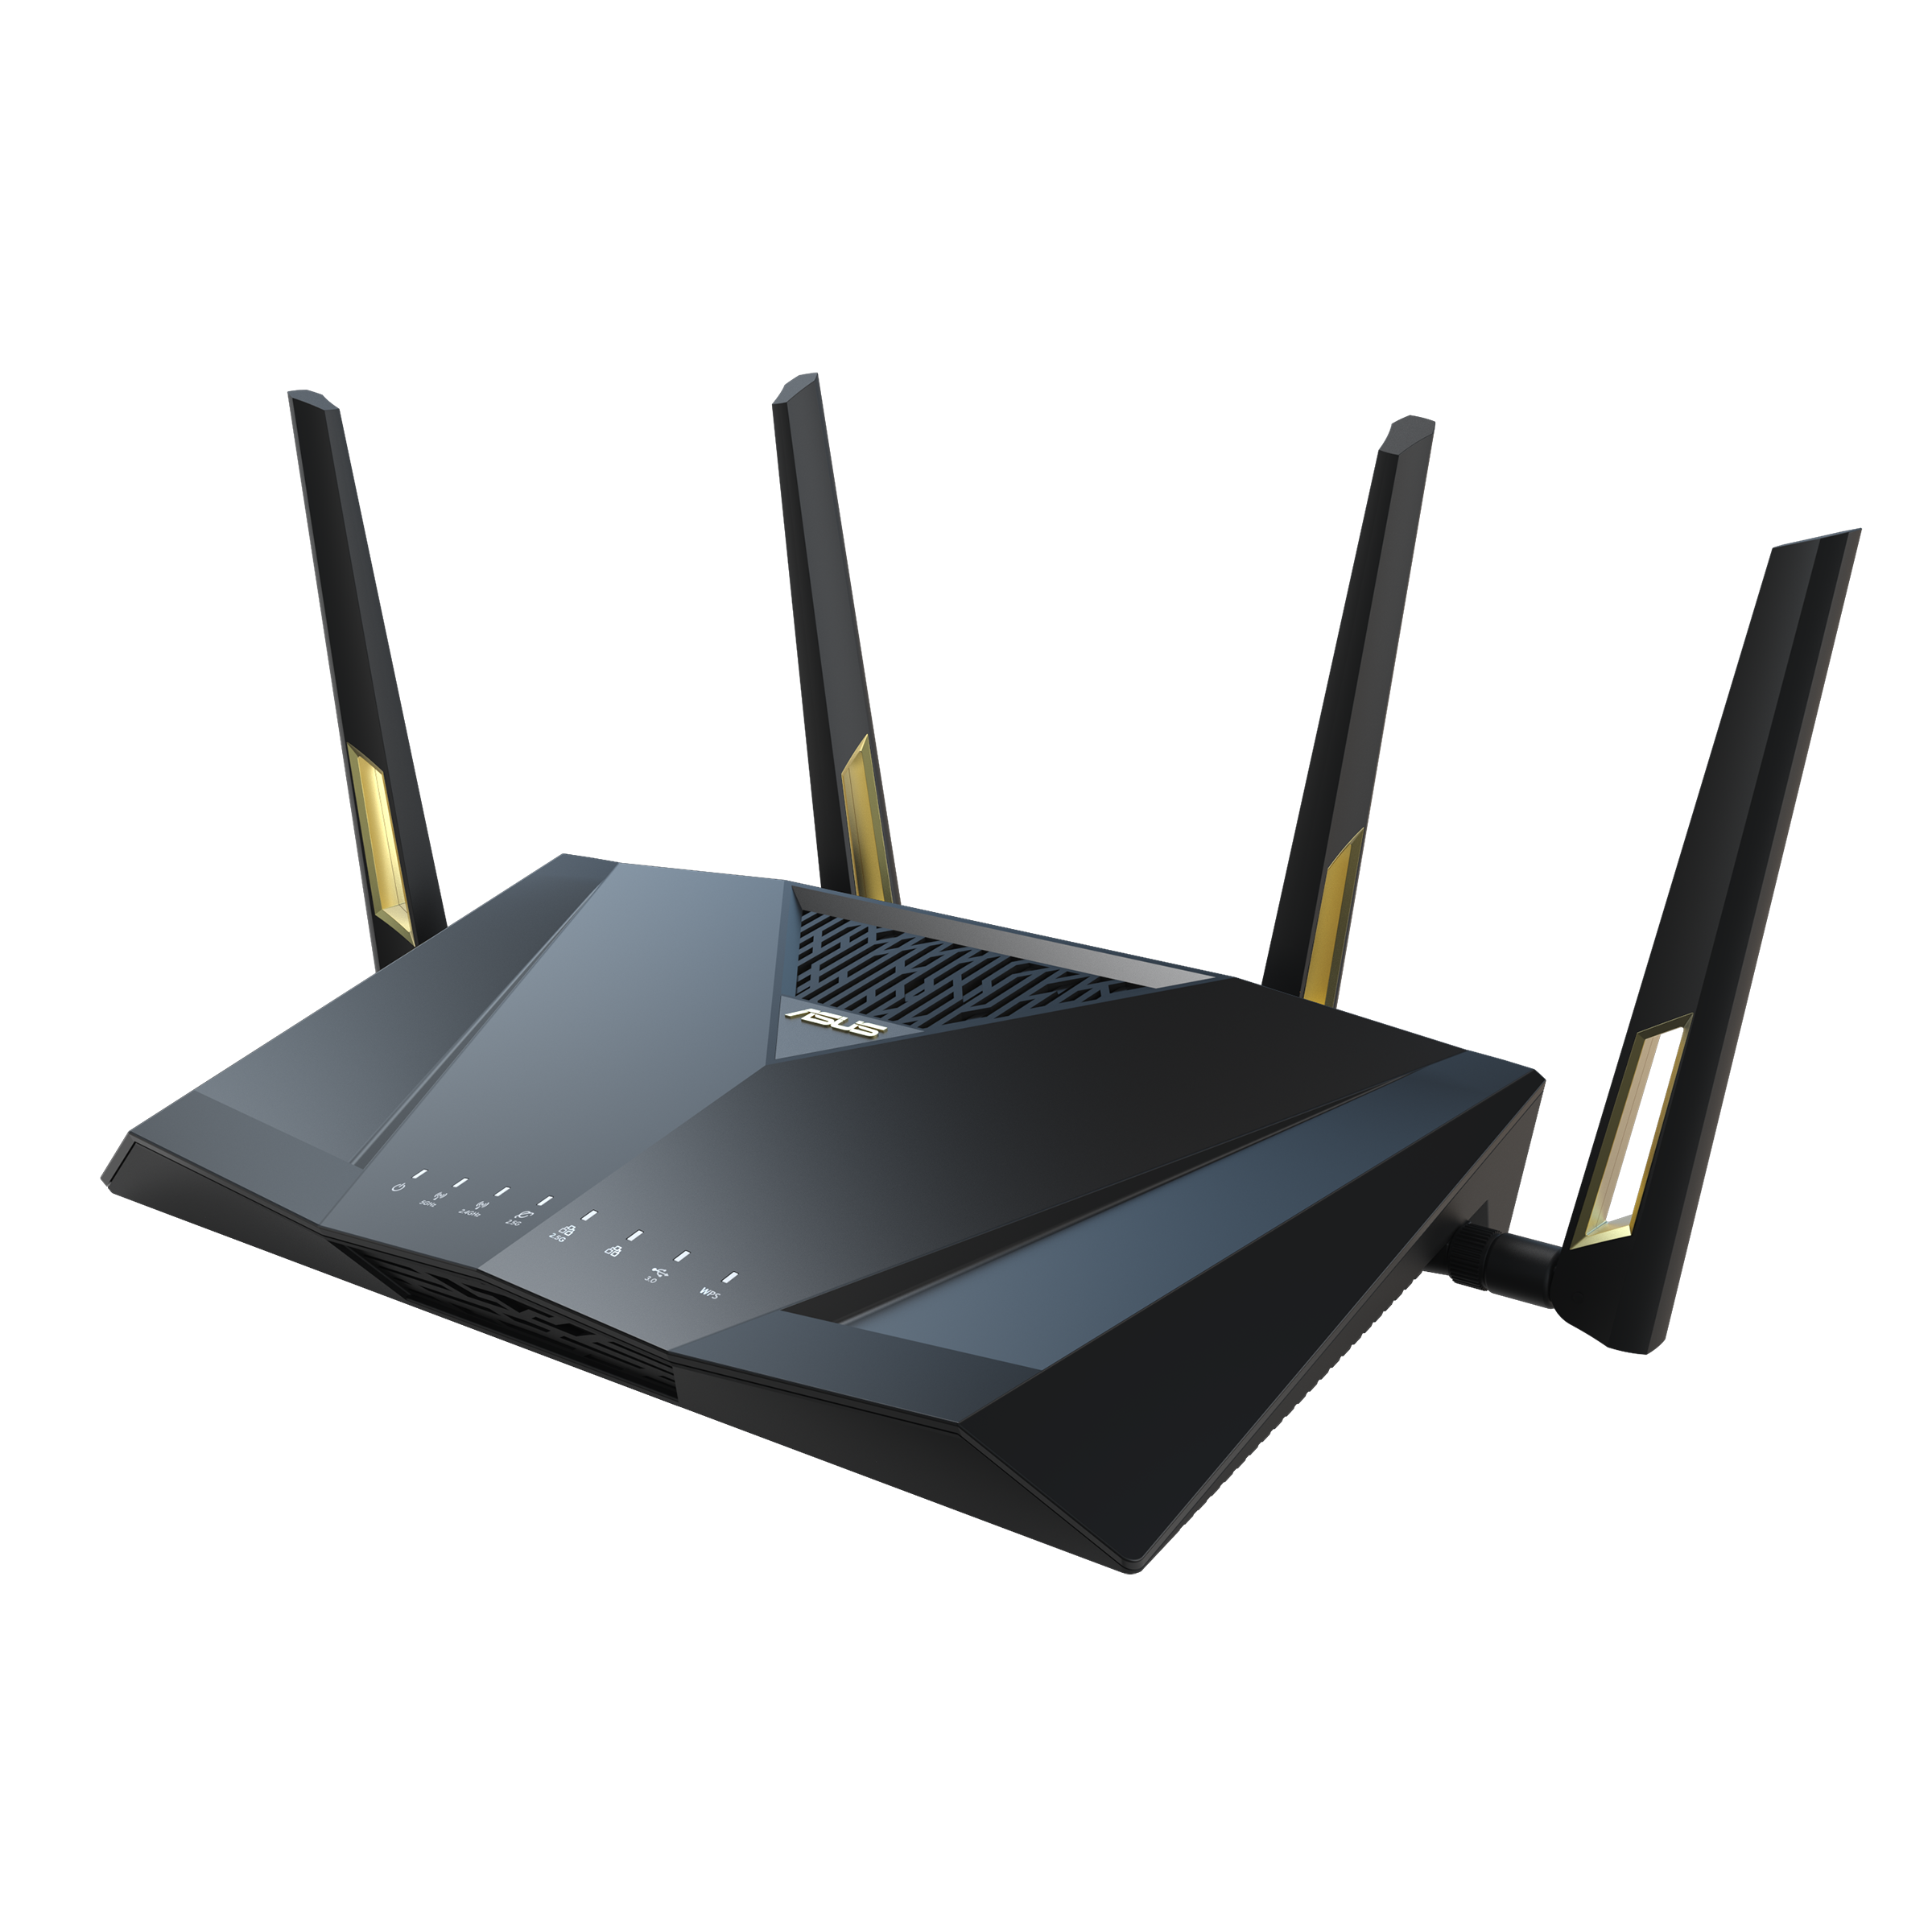 RT-AX88U Pro - Online store｜WiFi Routers｜ASUS USA